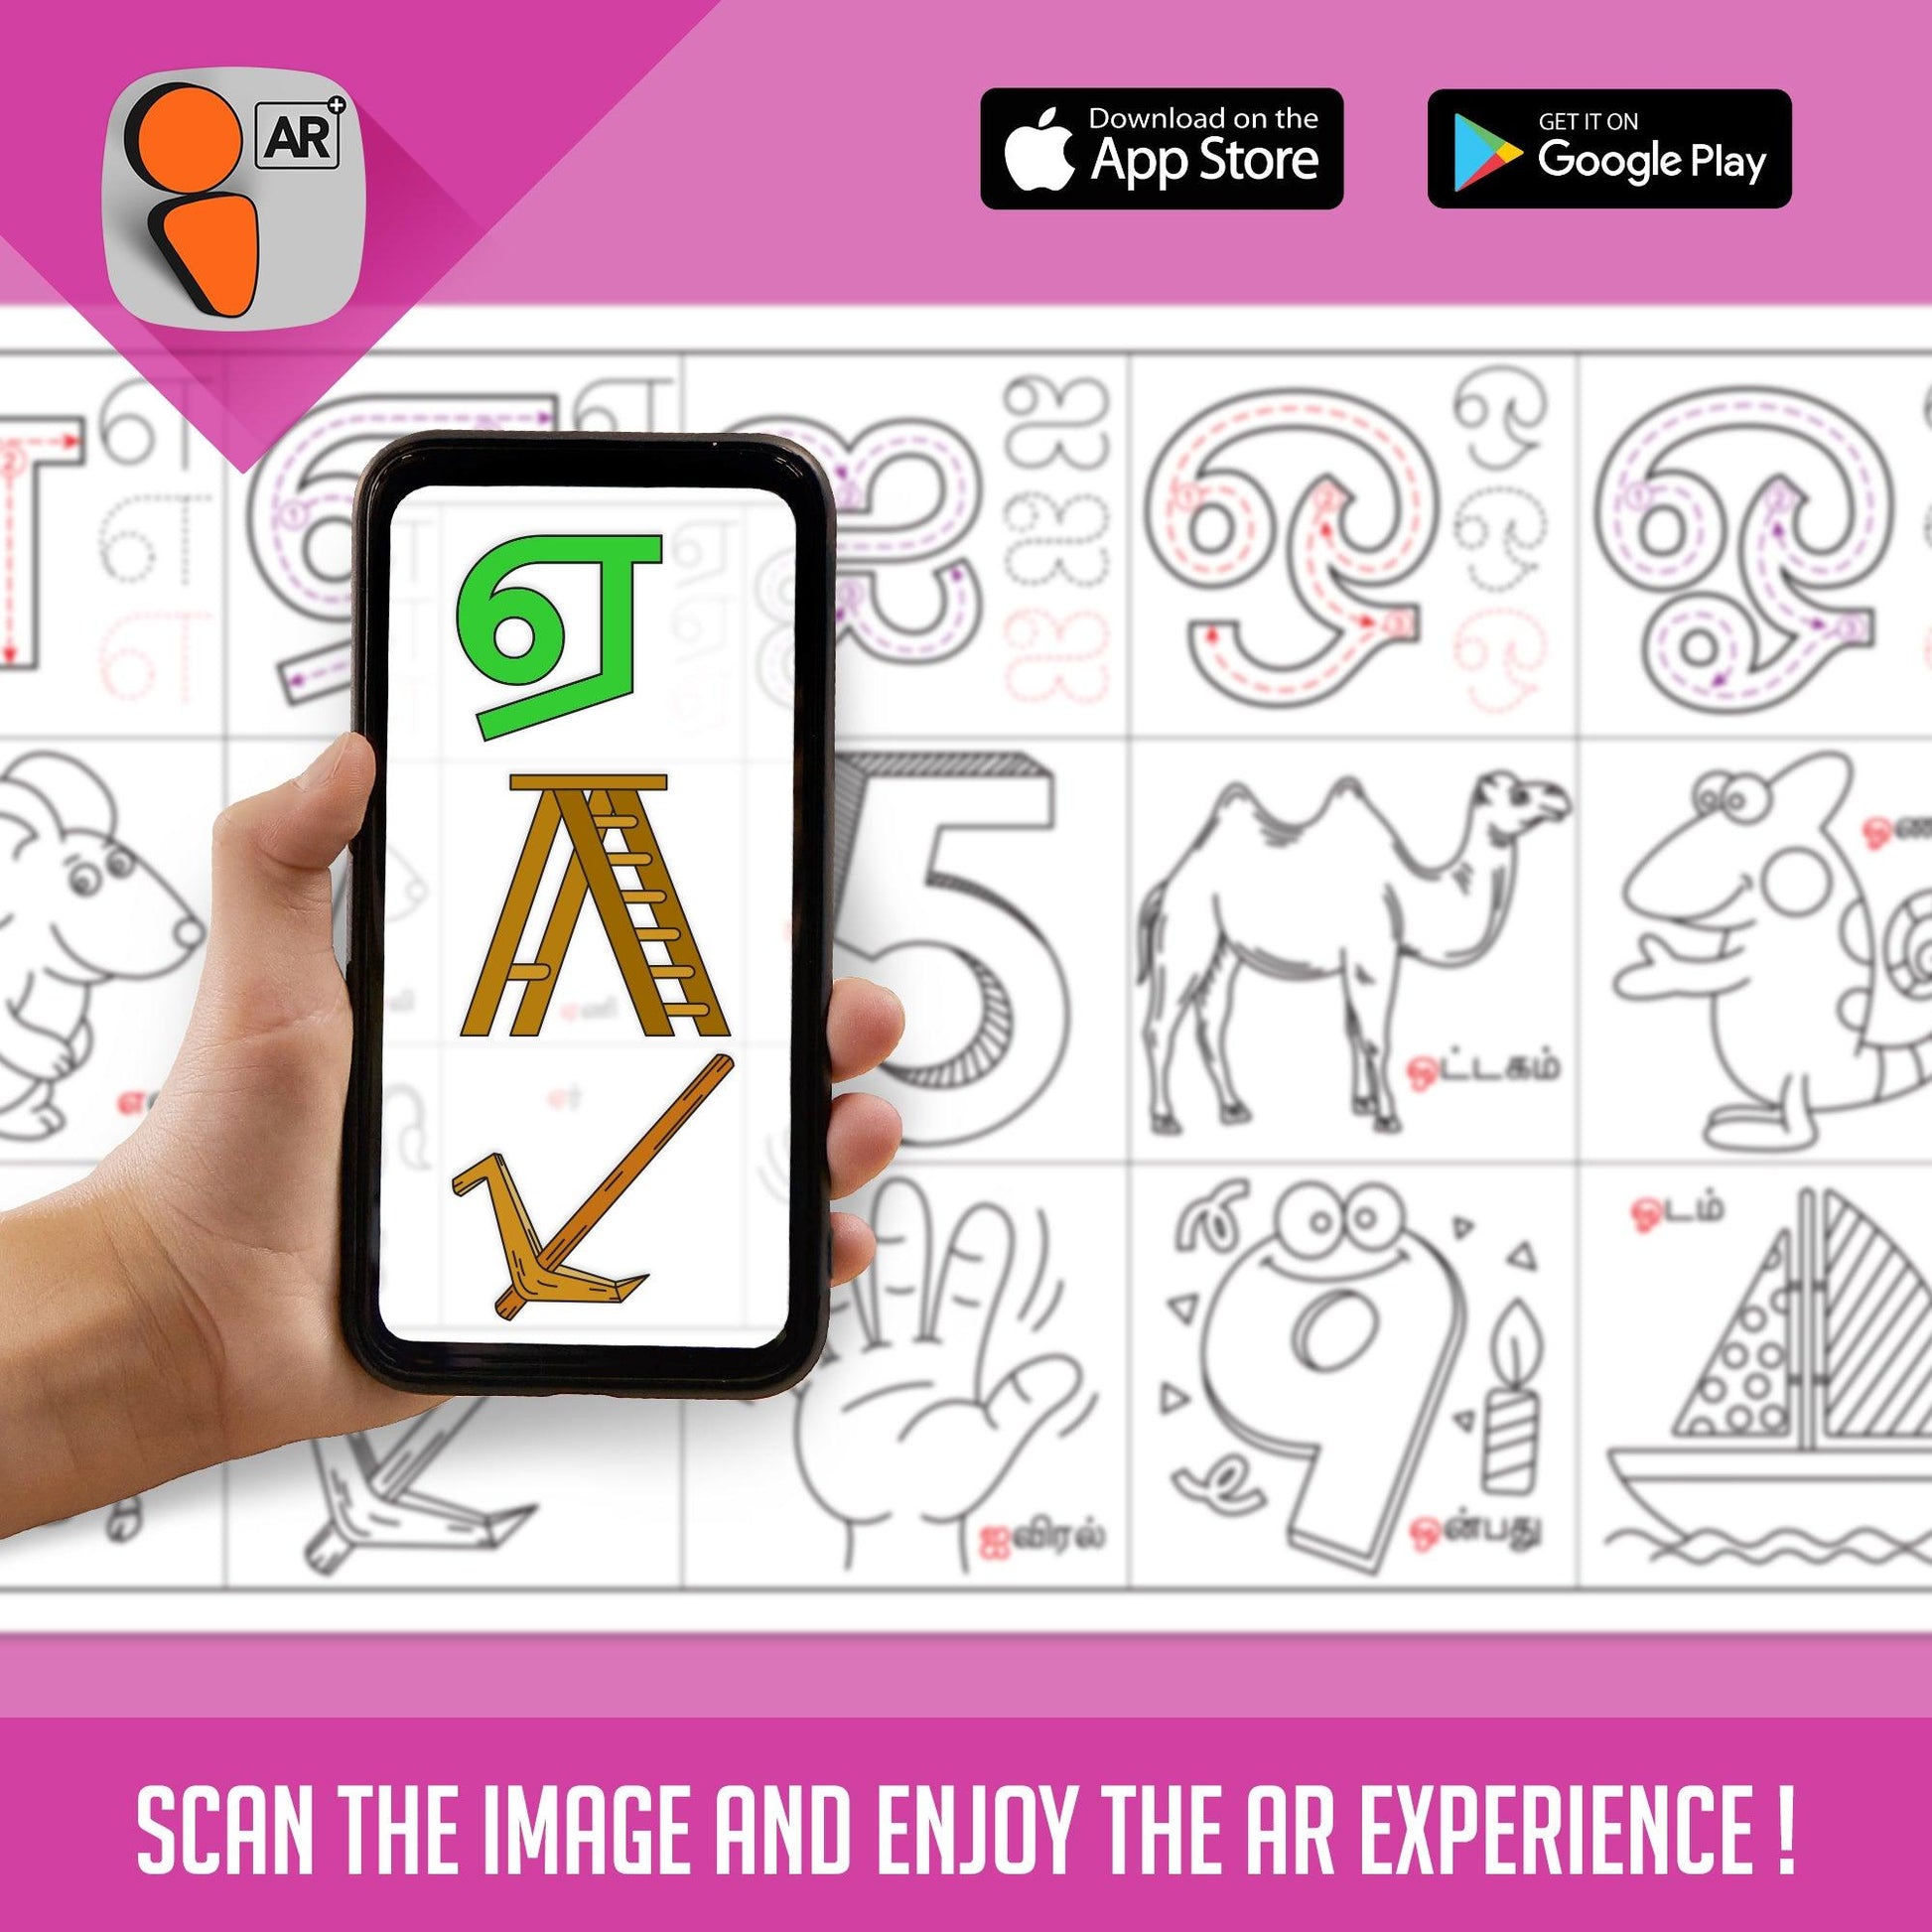 The images shows a pink background in which a sheet is placed with colourful picture and tamil alphabets and a hand is showing a mobile phone with AR features